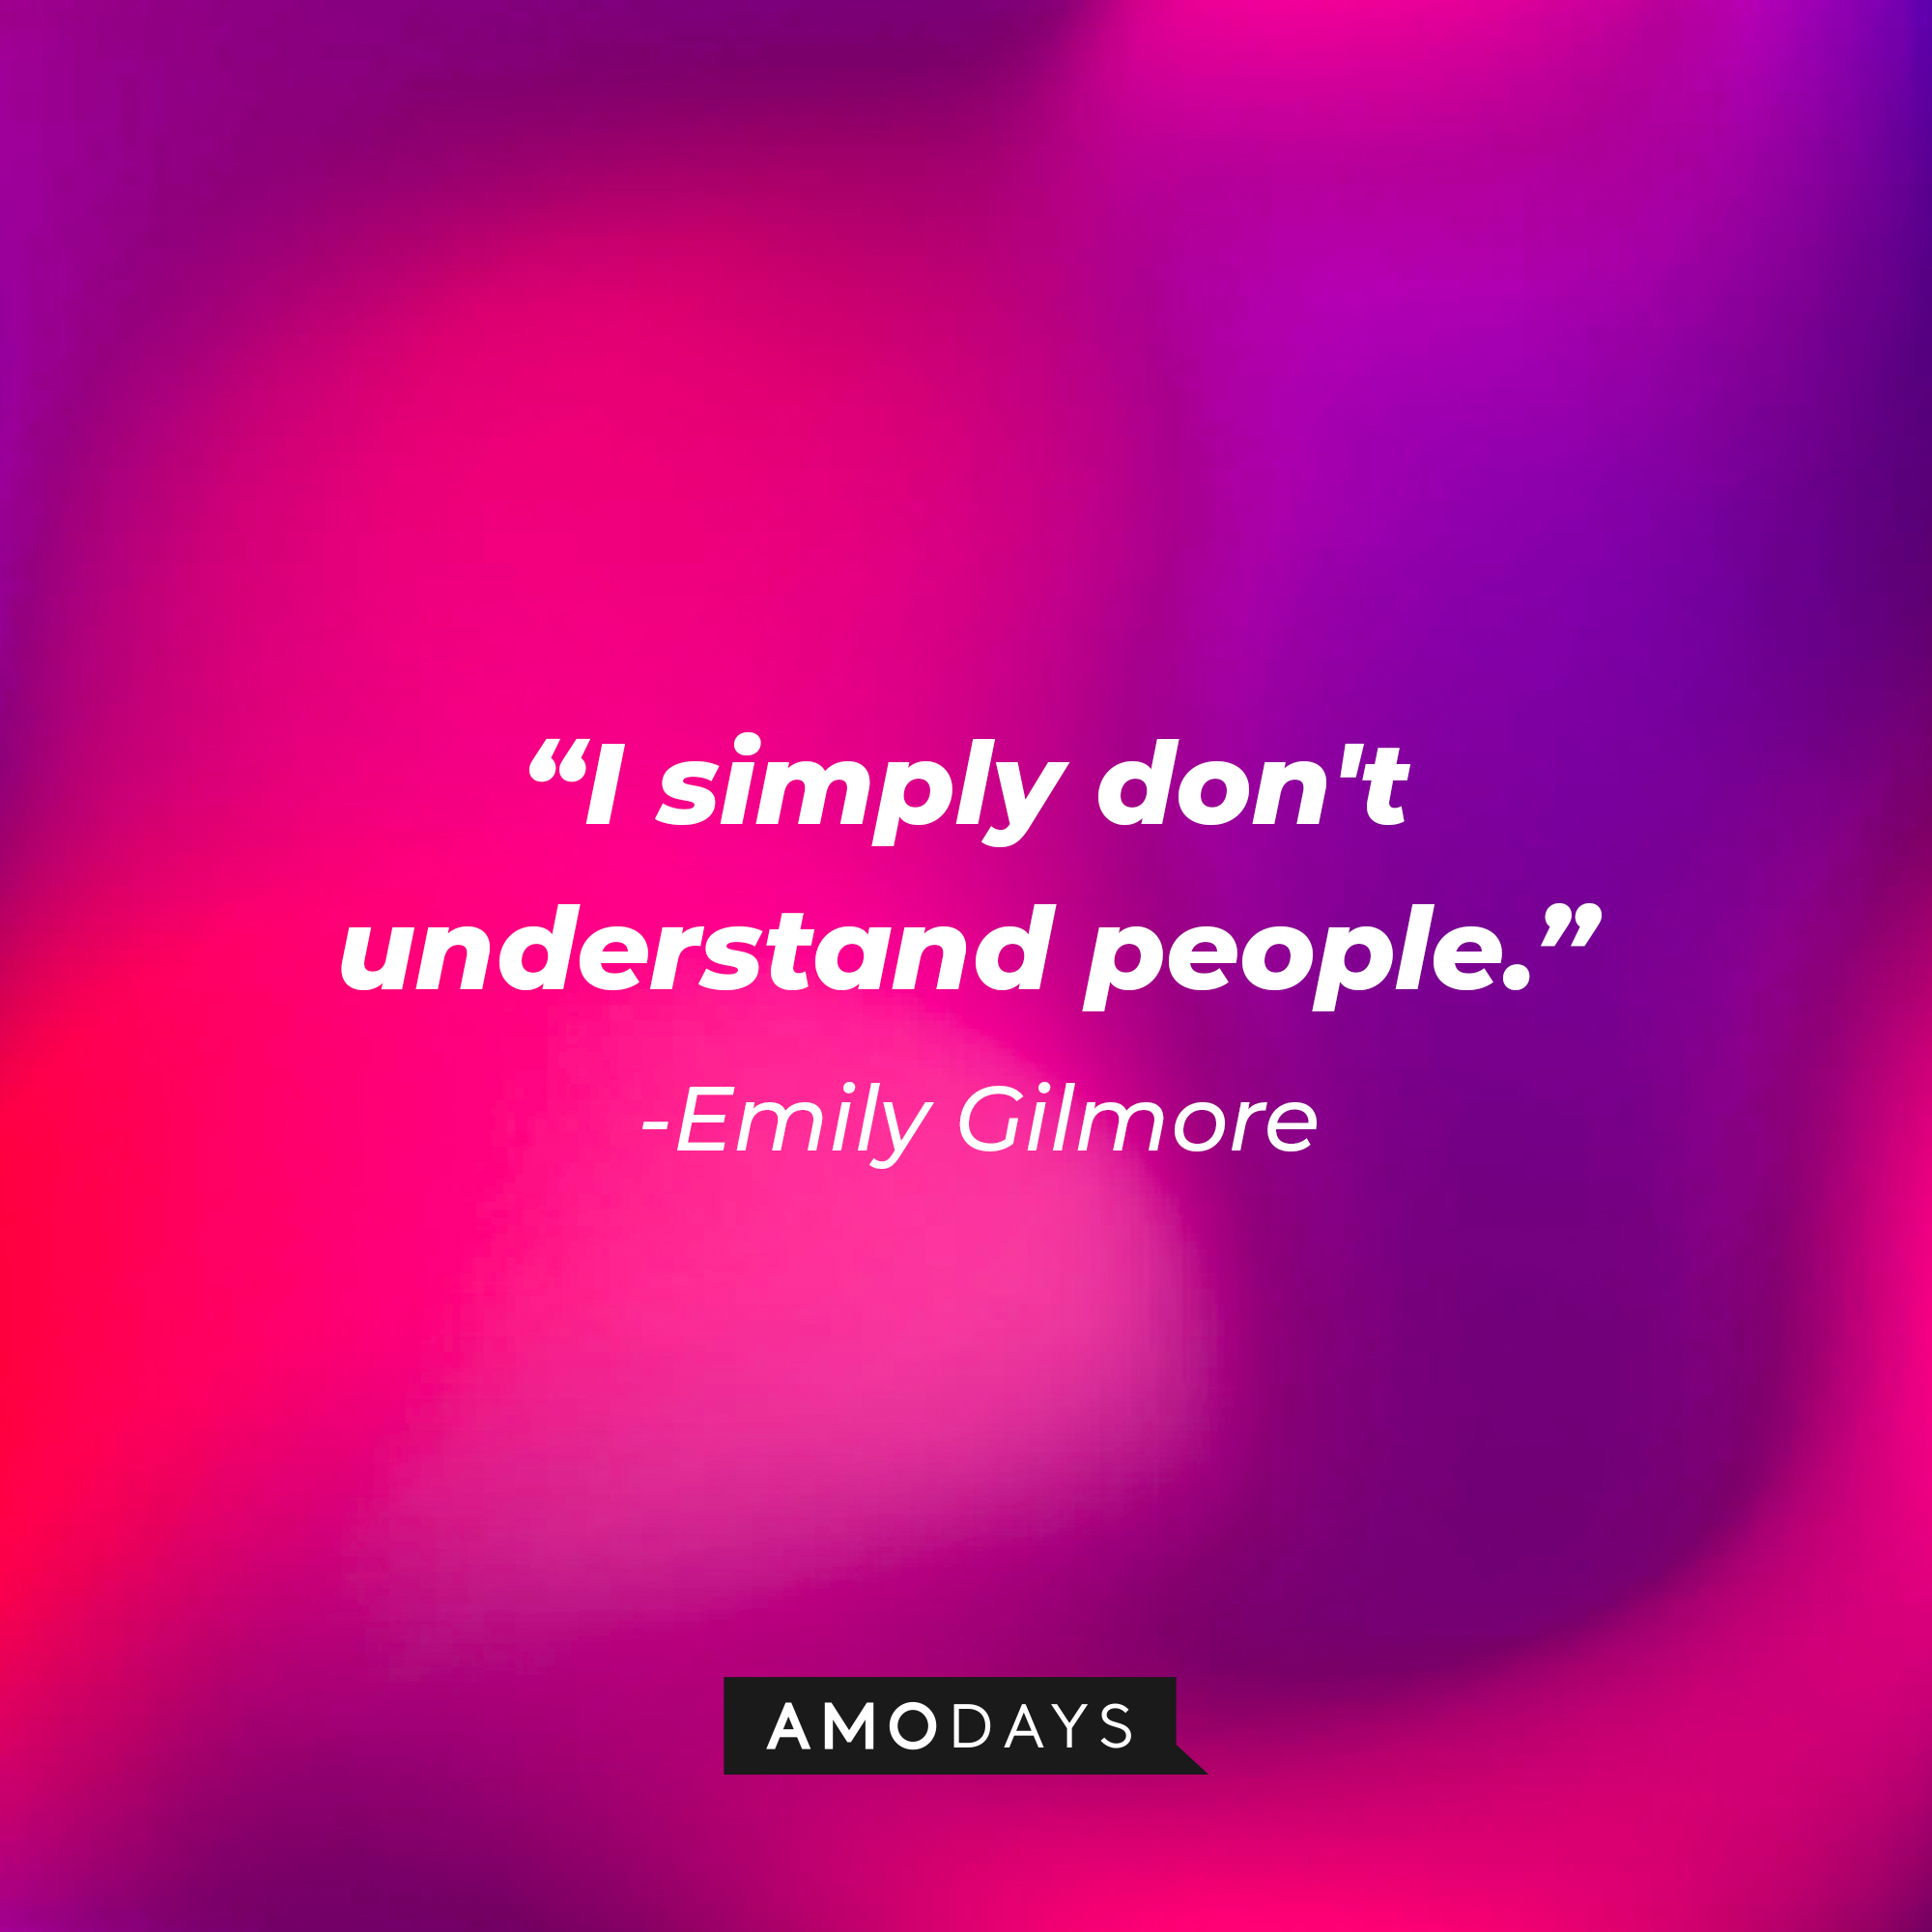 Emily Gilmore's quote: "I simply don't understand people." | Source: Amodays